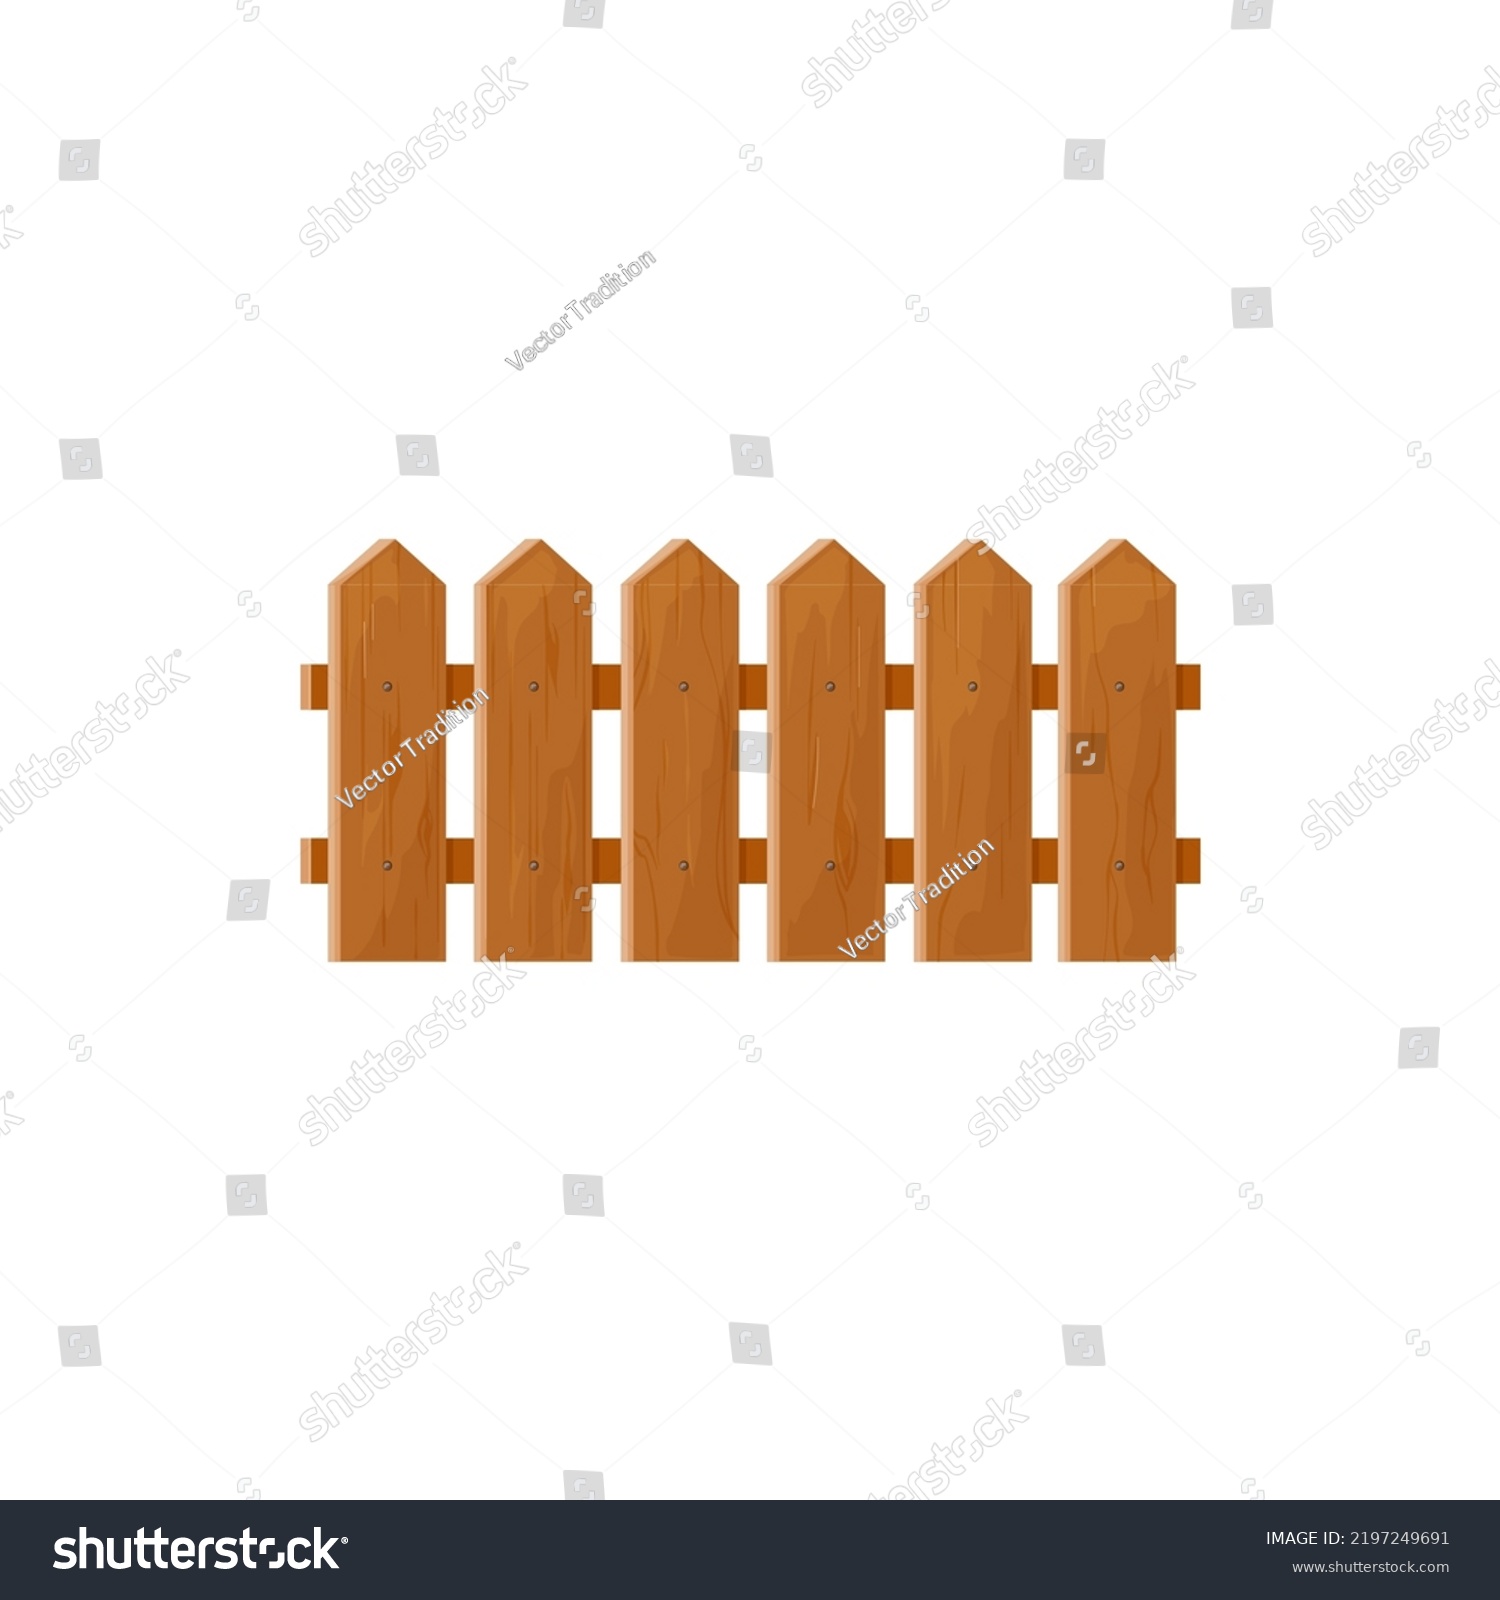 Outdoor Barrier Pickets Isolated Wooden Fence Stock Vector Royalty Free Shutterstock